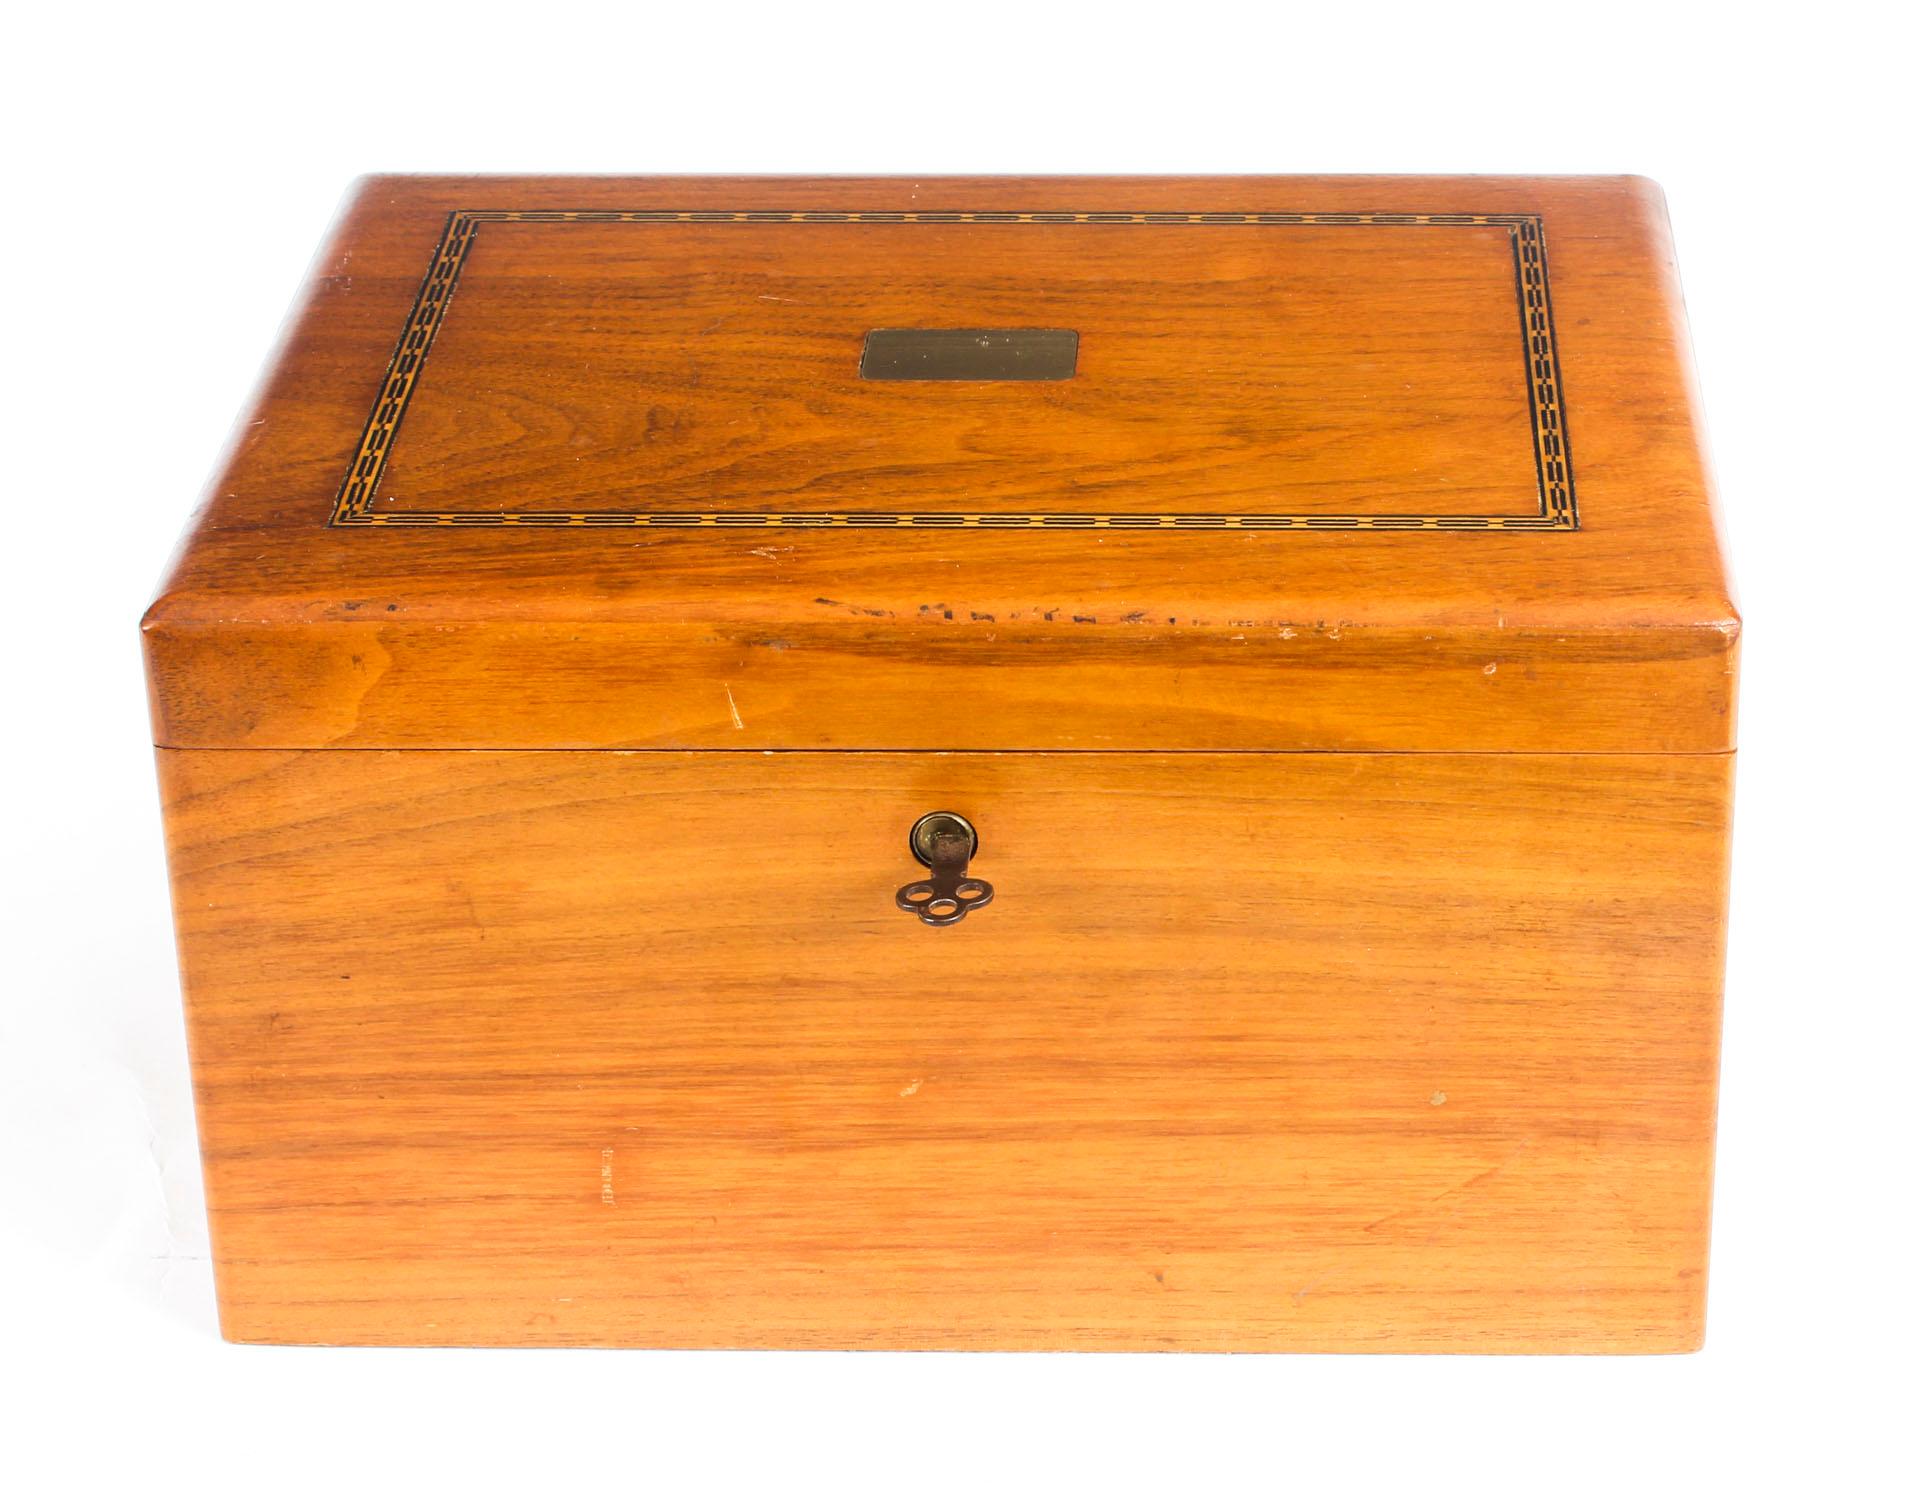 Vintage solid walnut cigar humidor and smoking accessories, mid-20th century in date.

It has a Spanish cedar-lined interior which helps to keep the aroma and is equipped with a humidification system.

The lid has crossbanded decoration and a